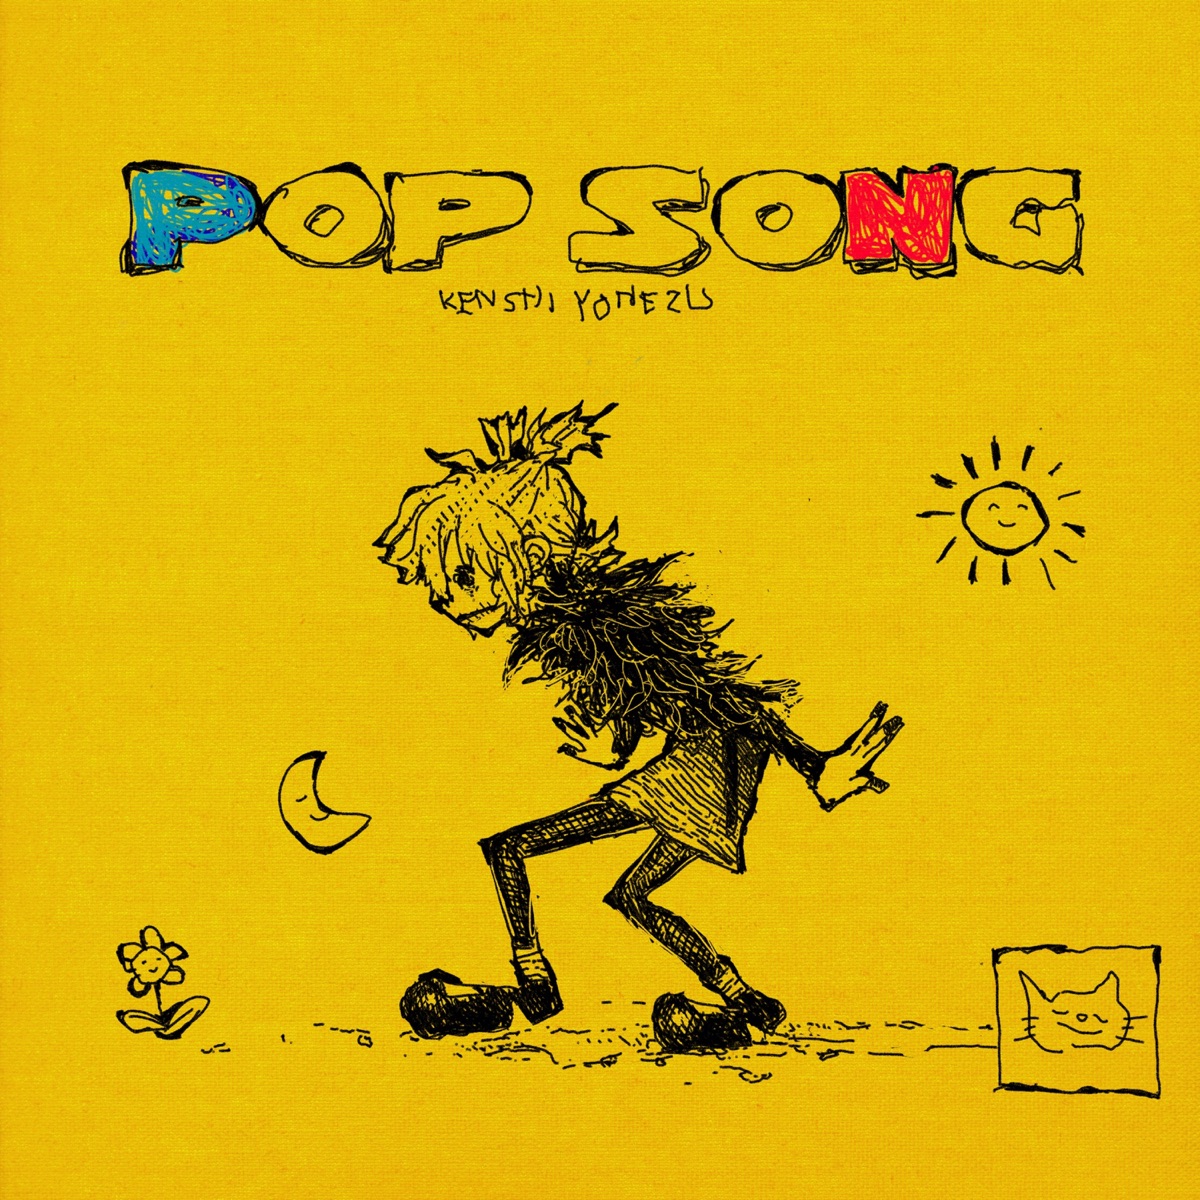 Cover art for『Kenshi Yonezu - POP SONG』from the release『POP SONG